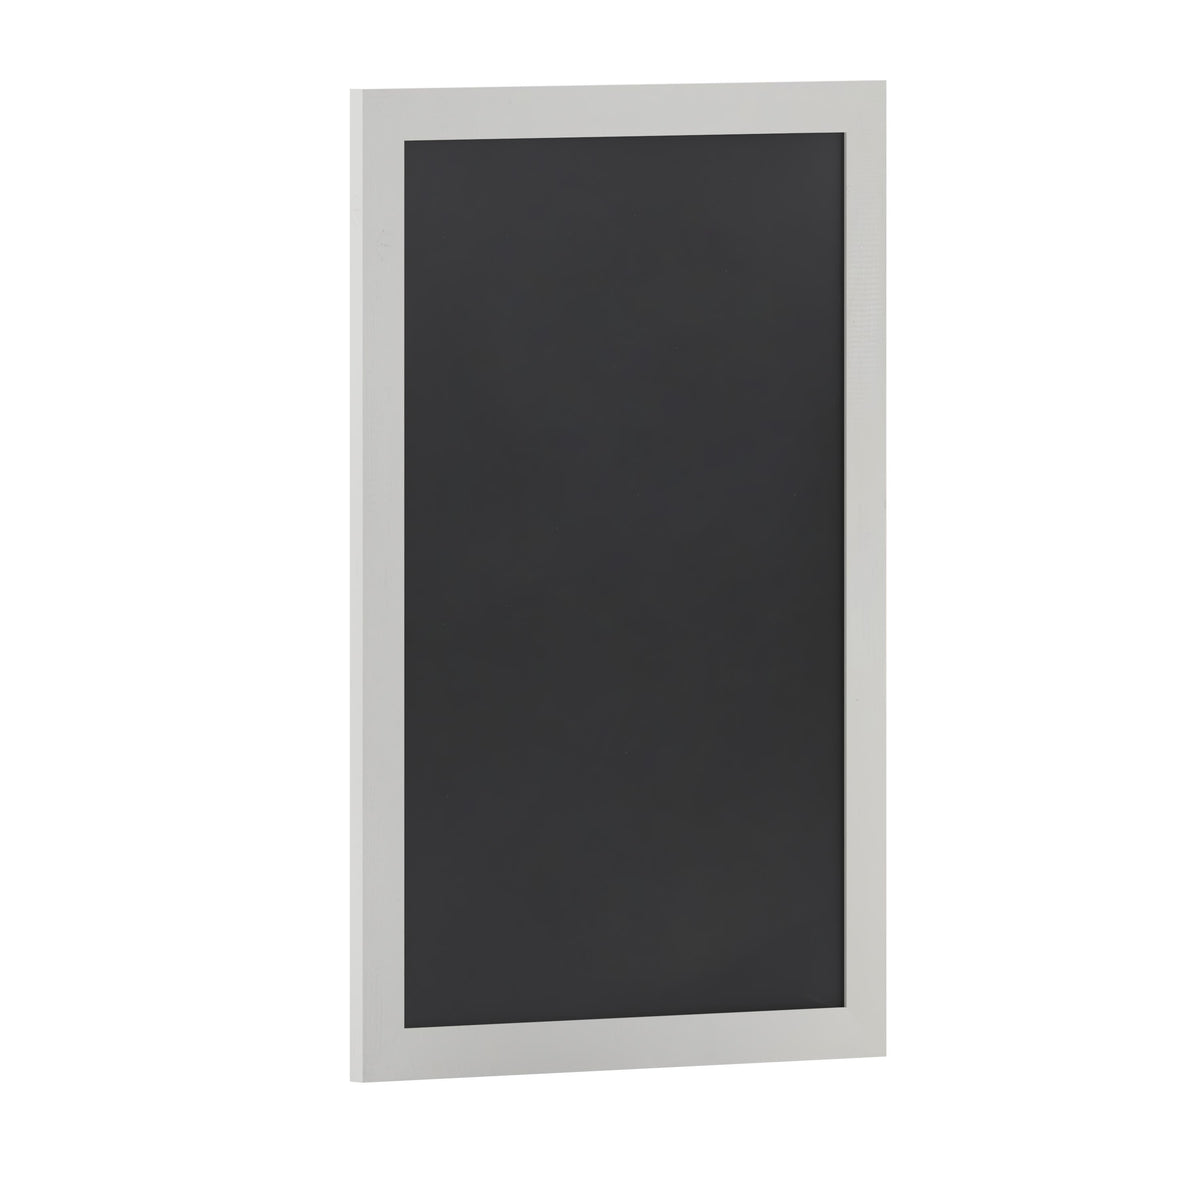 Solid White,24inchW x 0.75inchD x 36inchH |#| 24inch x 36inch Wall Mounted Magnetic Chalkboard with Wooden Frame -White